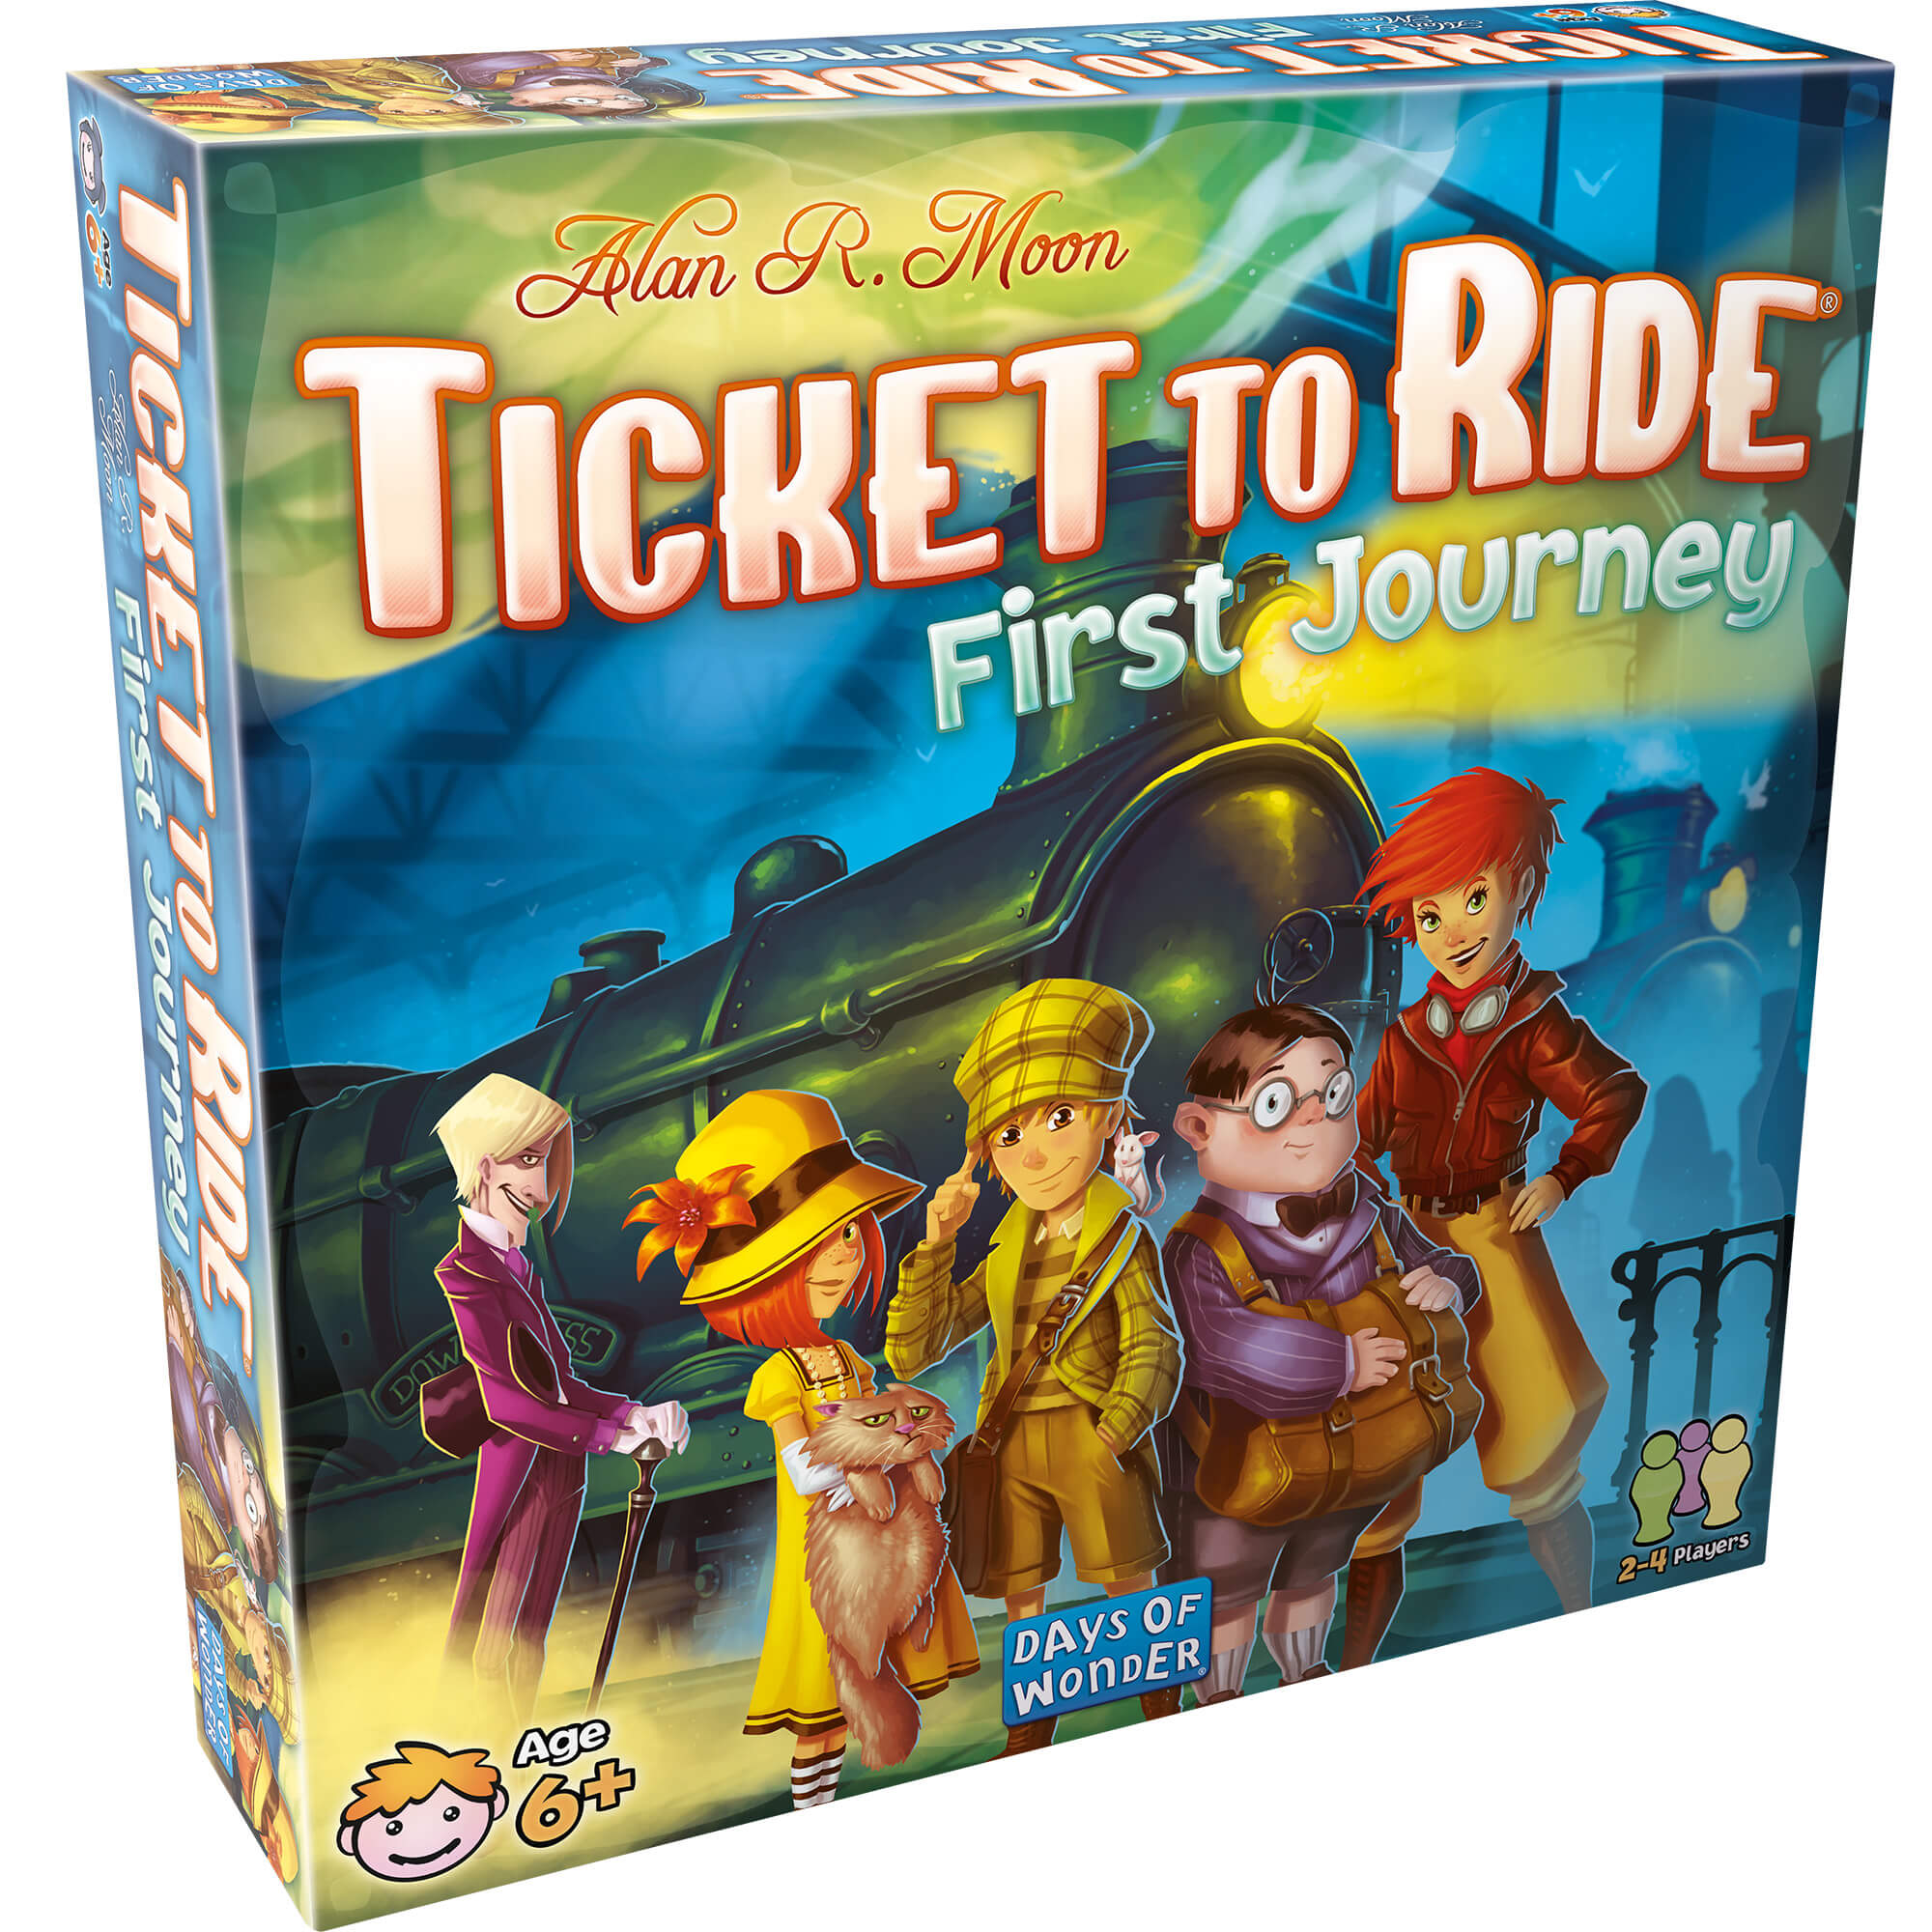 Ticket to Ride First Journey Front of box